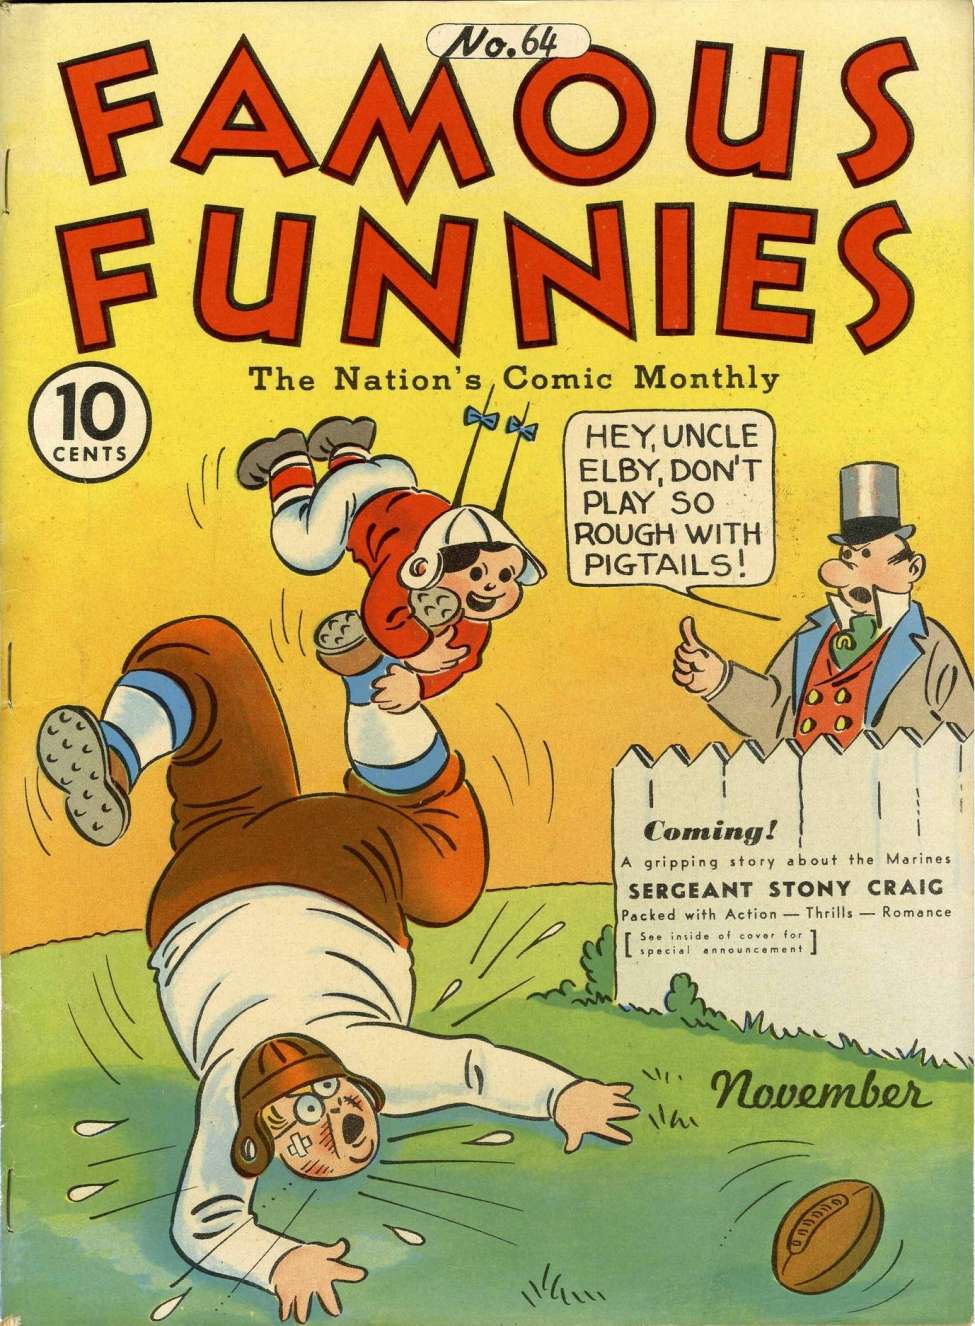 Comic Book Cover For Famous Funnies 64